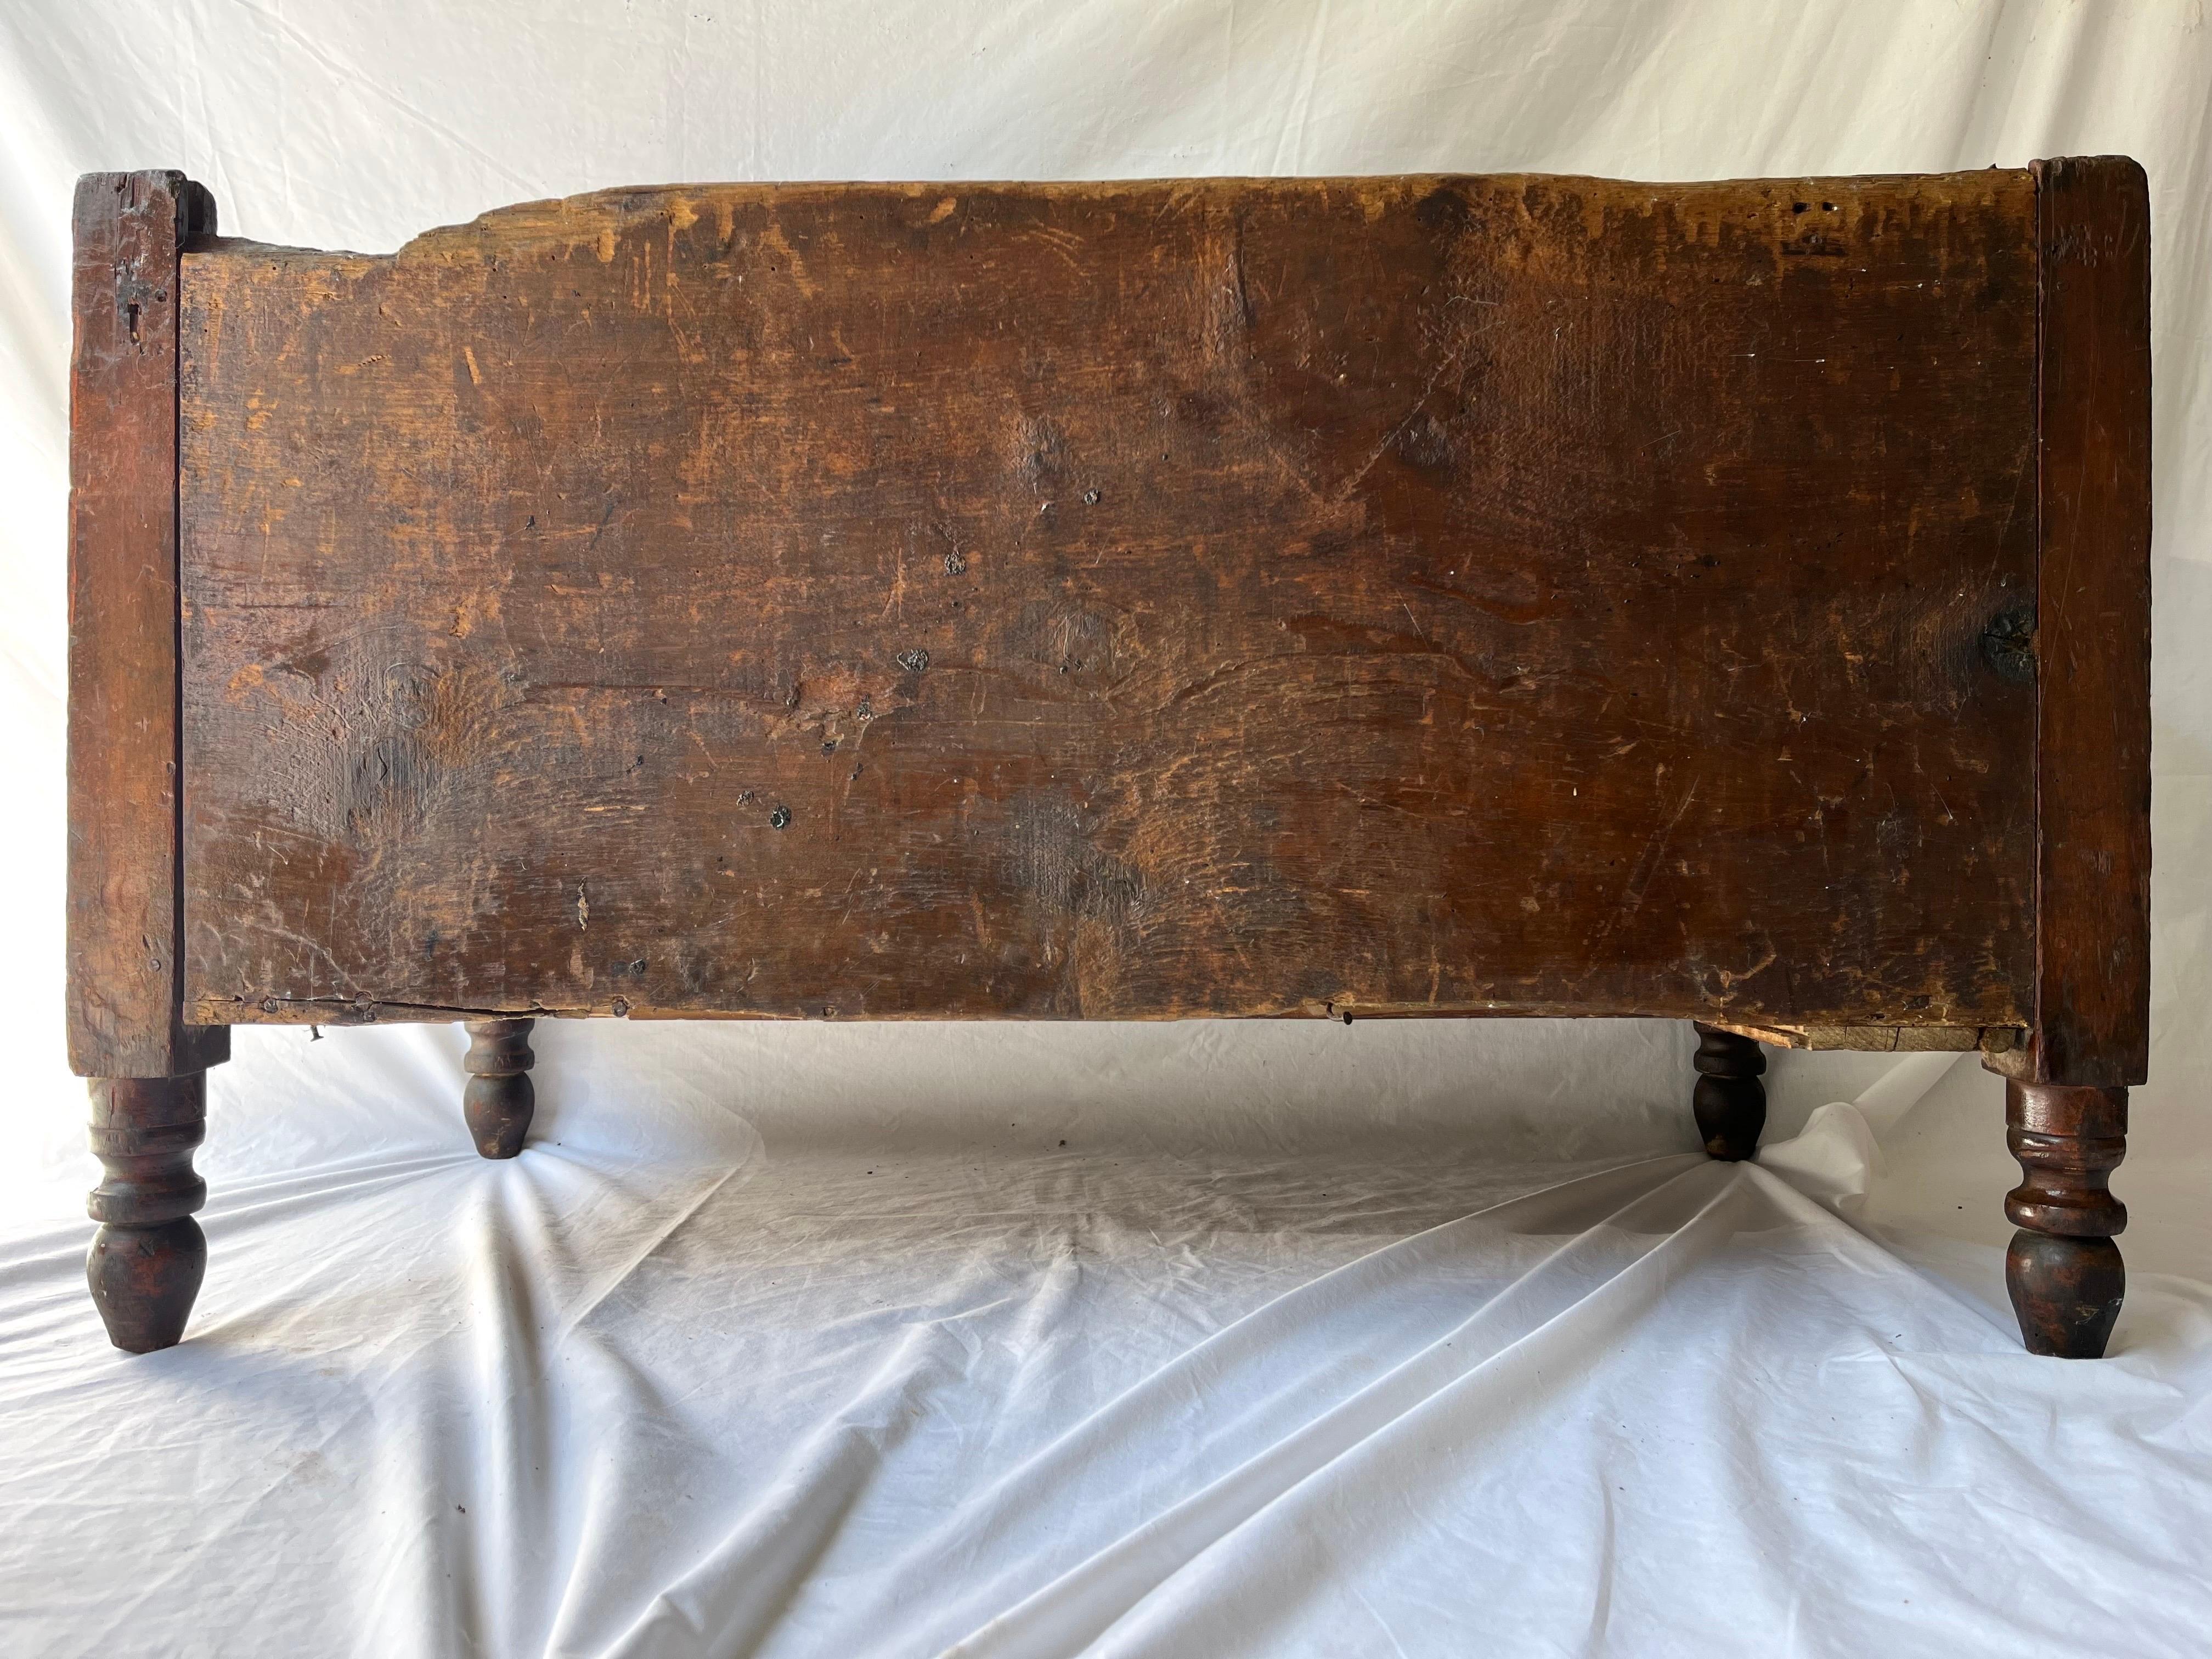 Tennessee Antique American Hand Built Primitive Blanket Chest Relic Cow Feeder For Sale 3